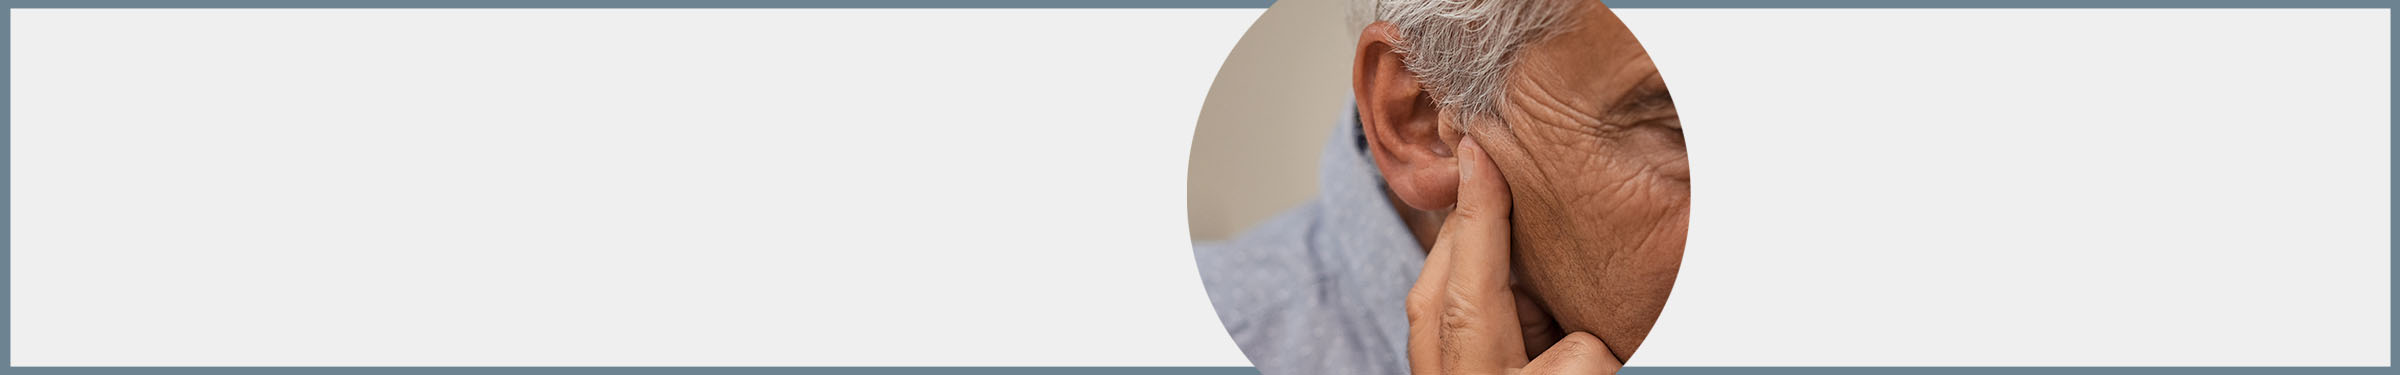 How to Prevent and Treat Age-Related Hearing Loss